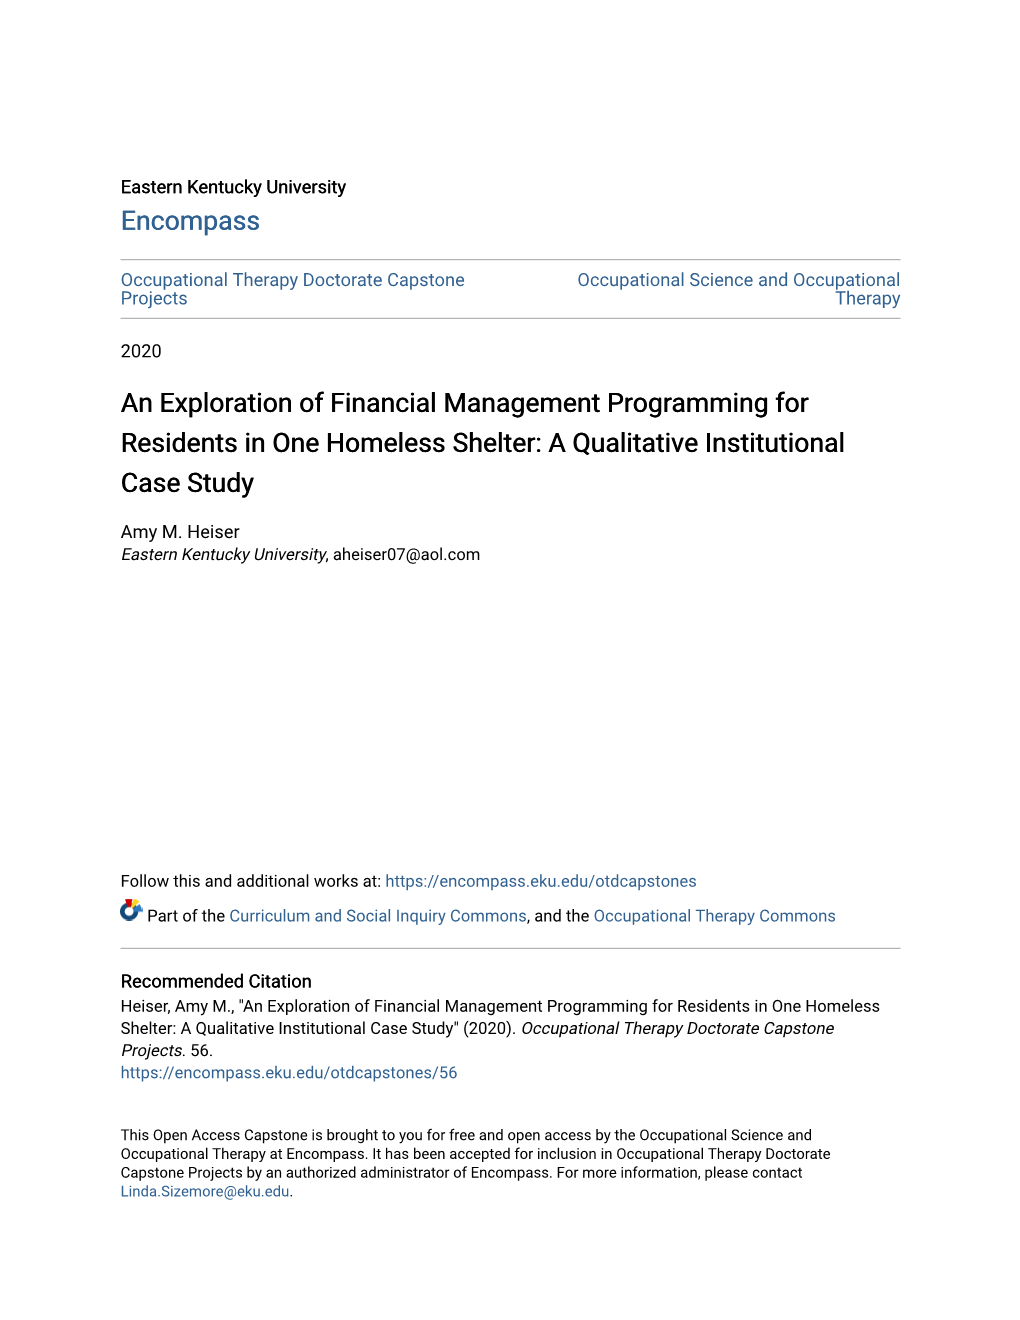 An Exploration of Financial Management Programming for Residents in One Homeless Shelter: a Qualitative Institutional Case Study